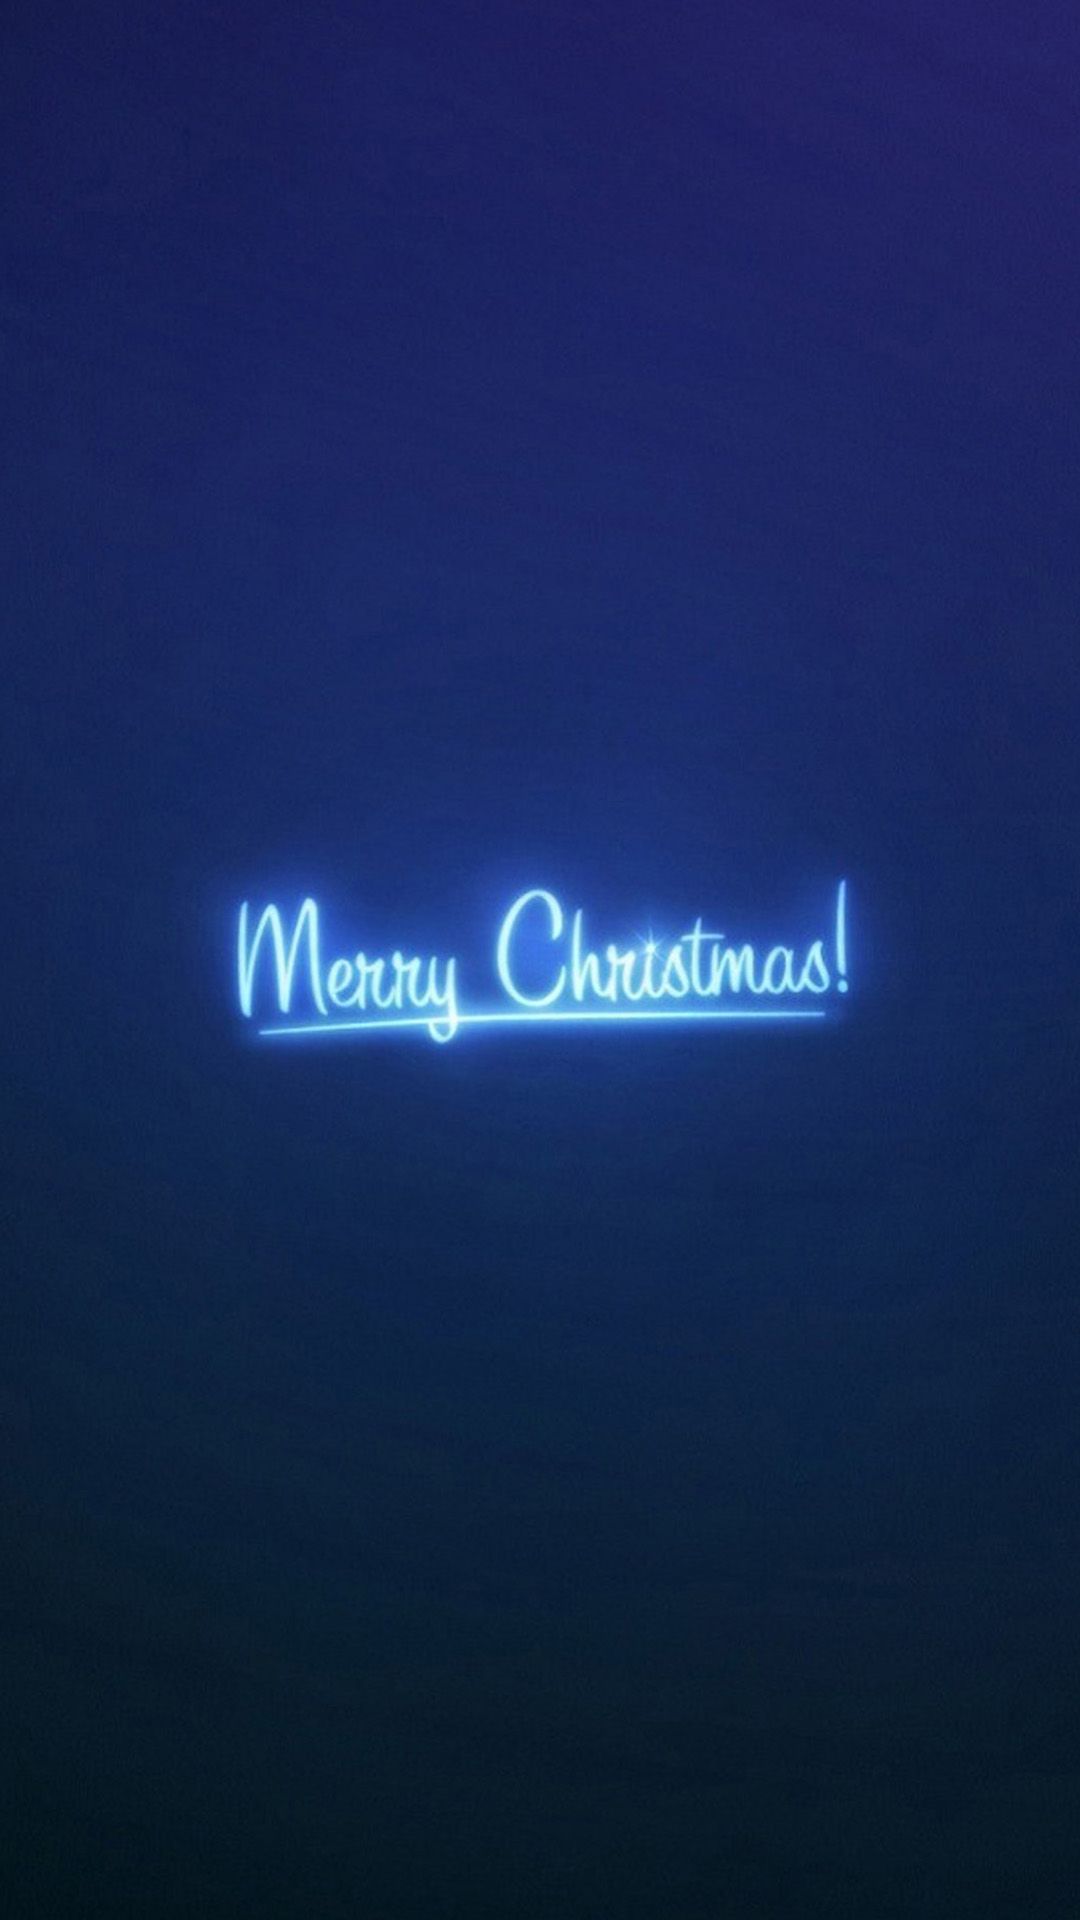 Merry Christmas Light Sign Android Wallpaper free download